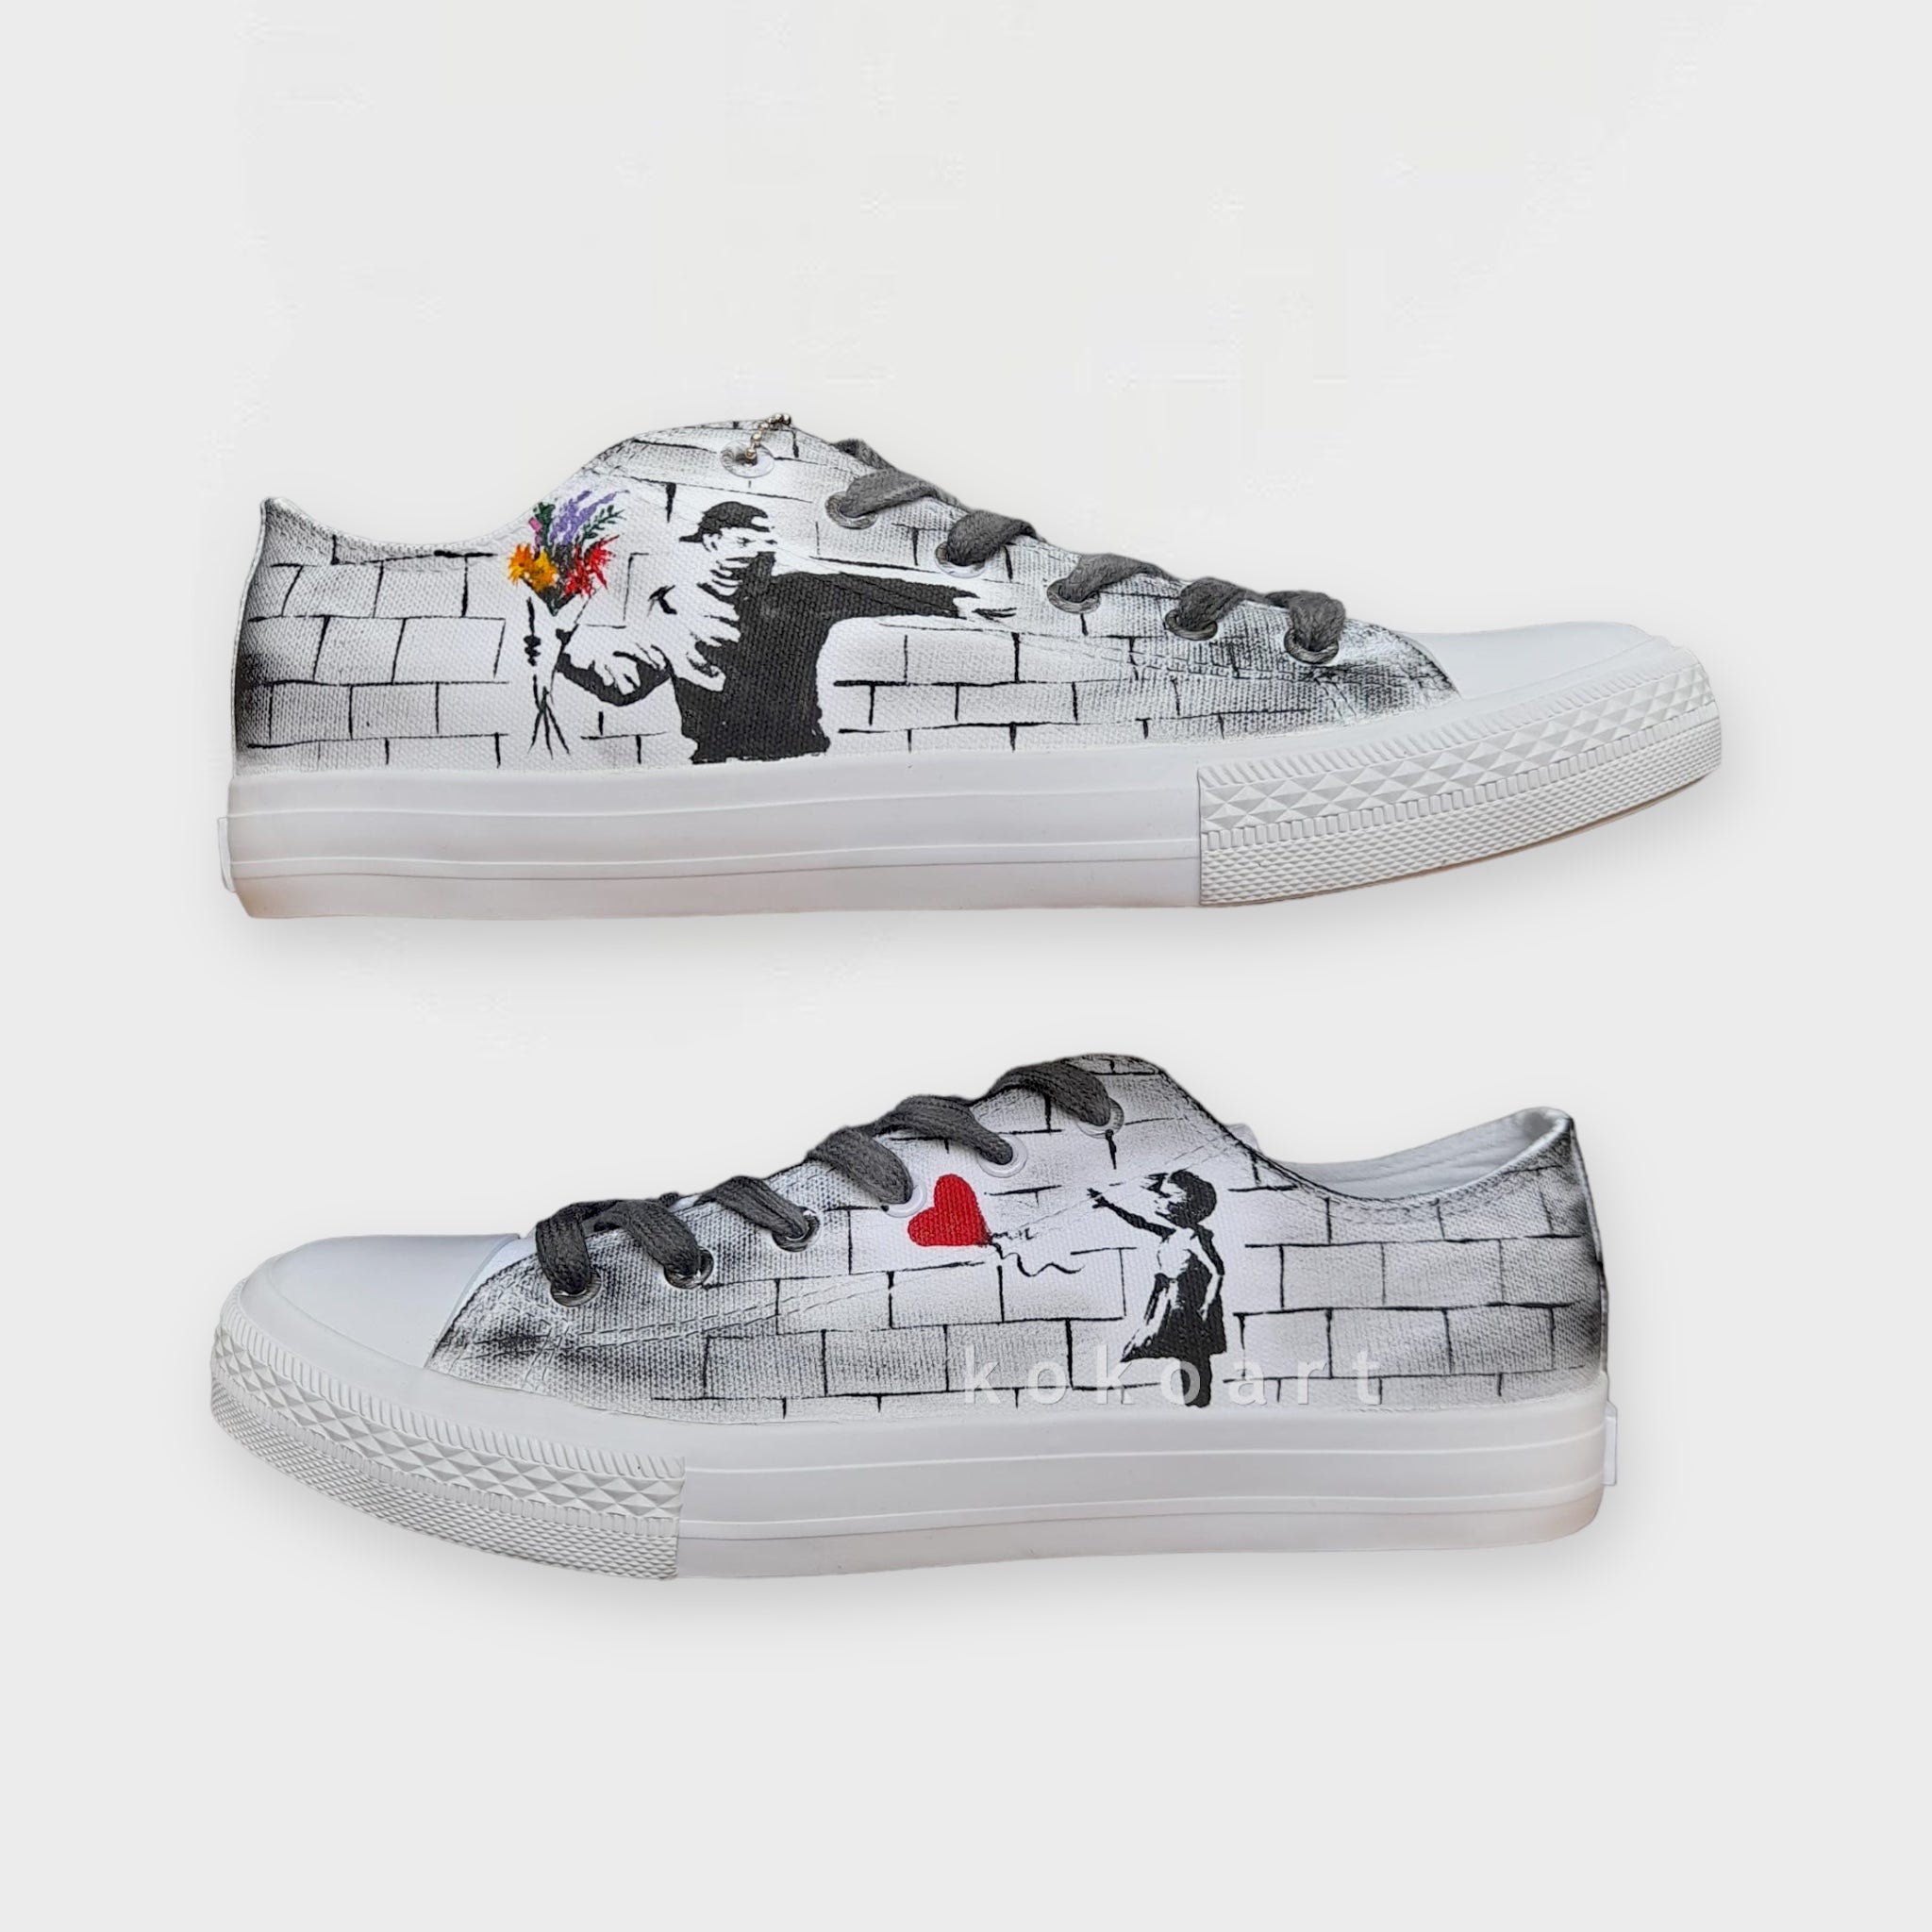 Banksy Girl with Balloon and Flower Thrower Hand Painted Shoes